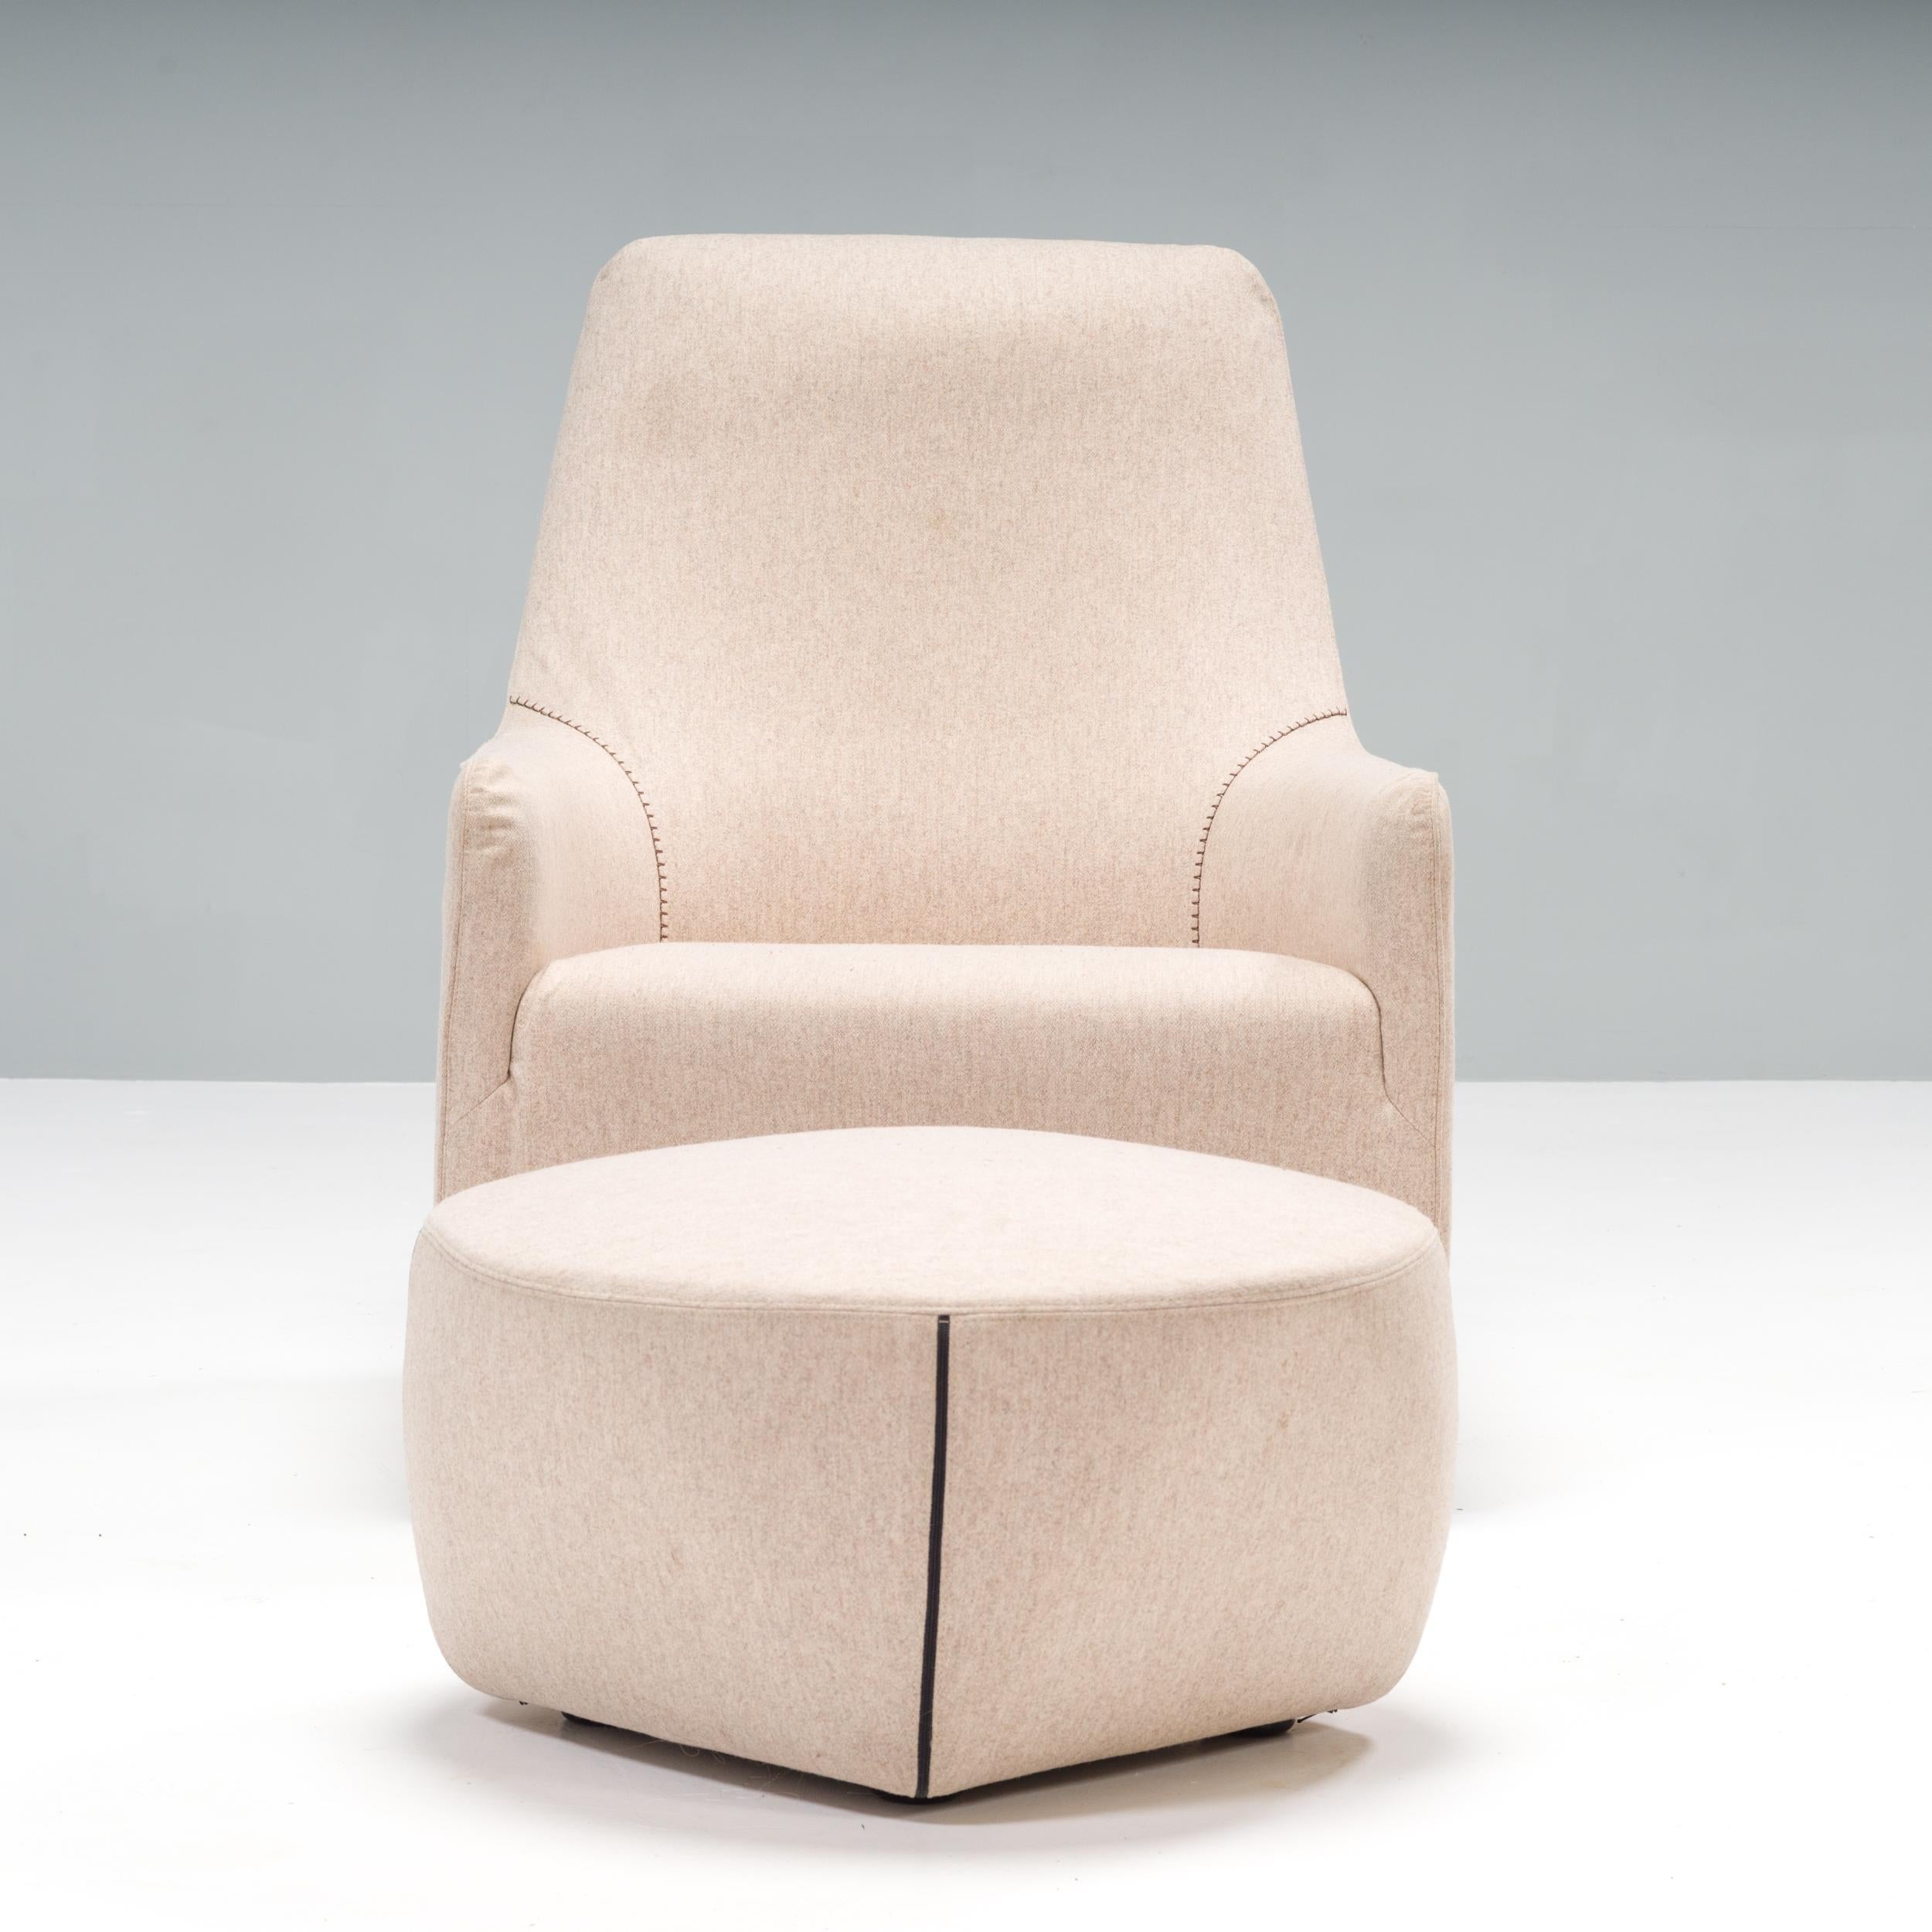 Designed by Rodolfo Dordoni for Minotti in 2005, the Portofino collection offers a modern update on the classic armchair styles.

With an extended backrest, this French bergère style chair is fully upholstered in grey fabric and has a fixed